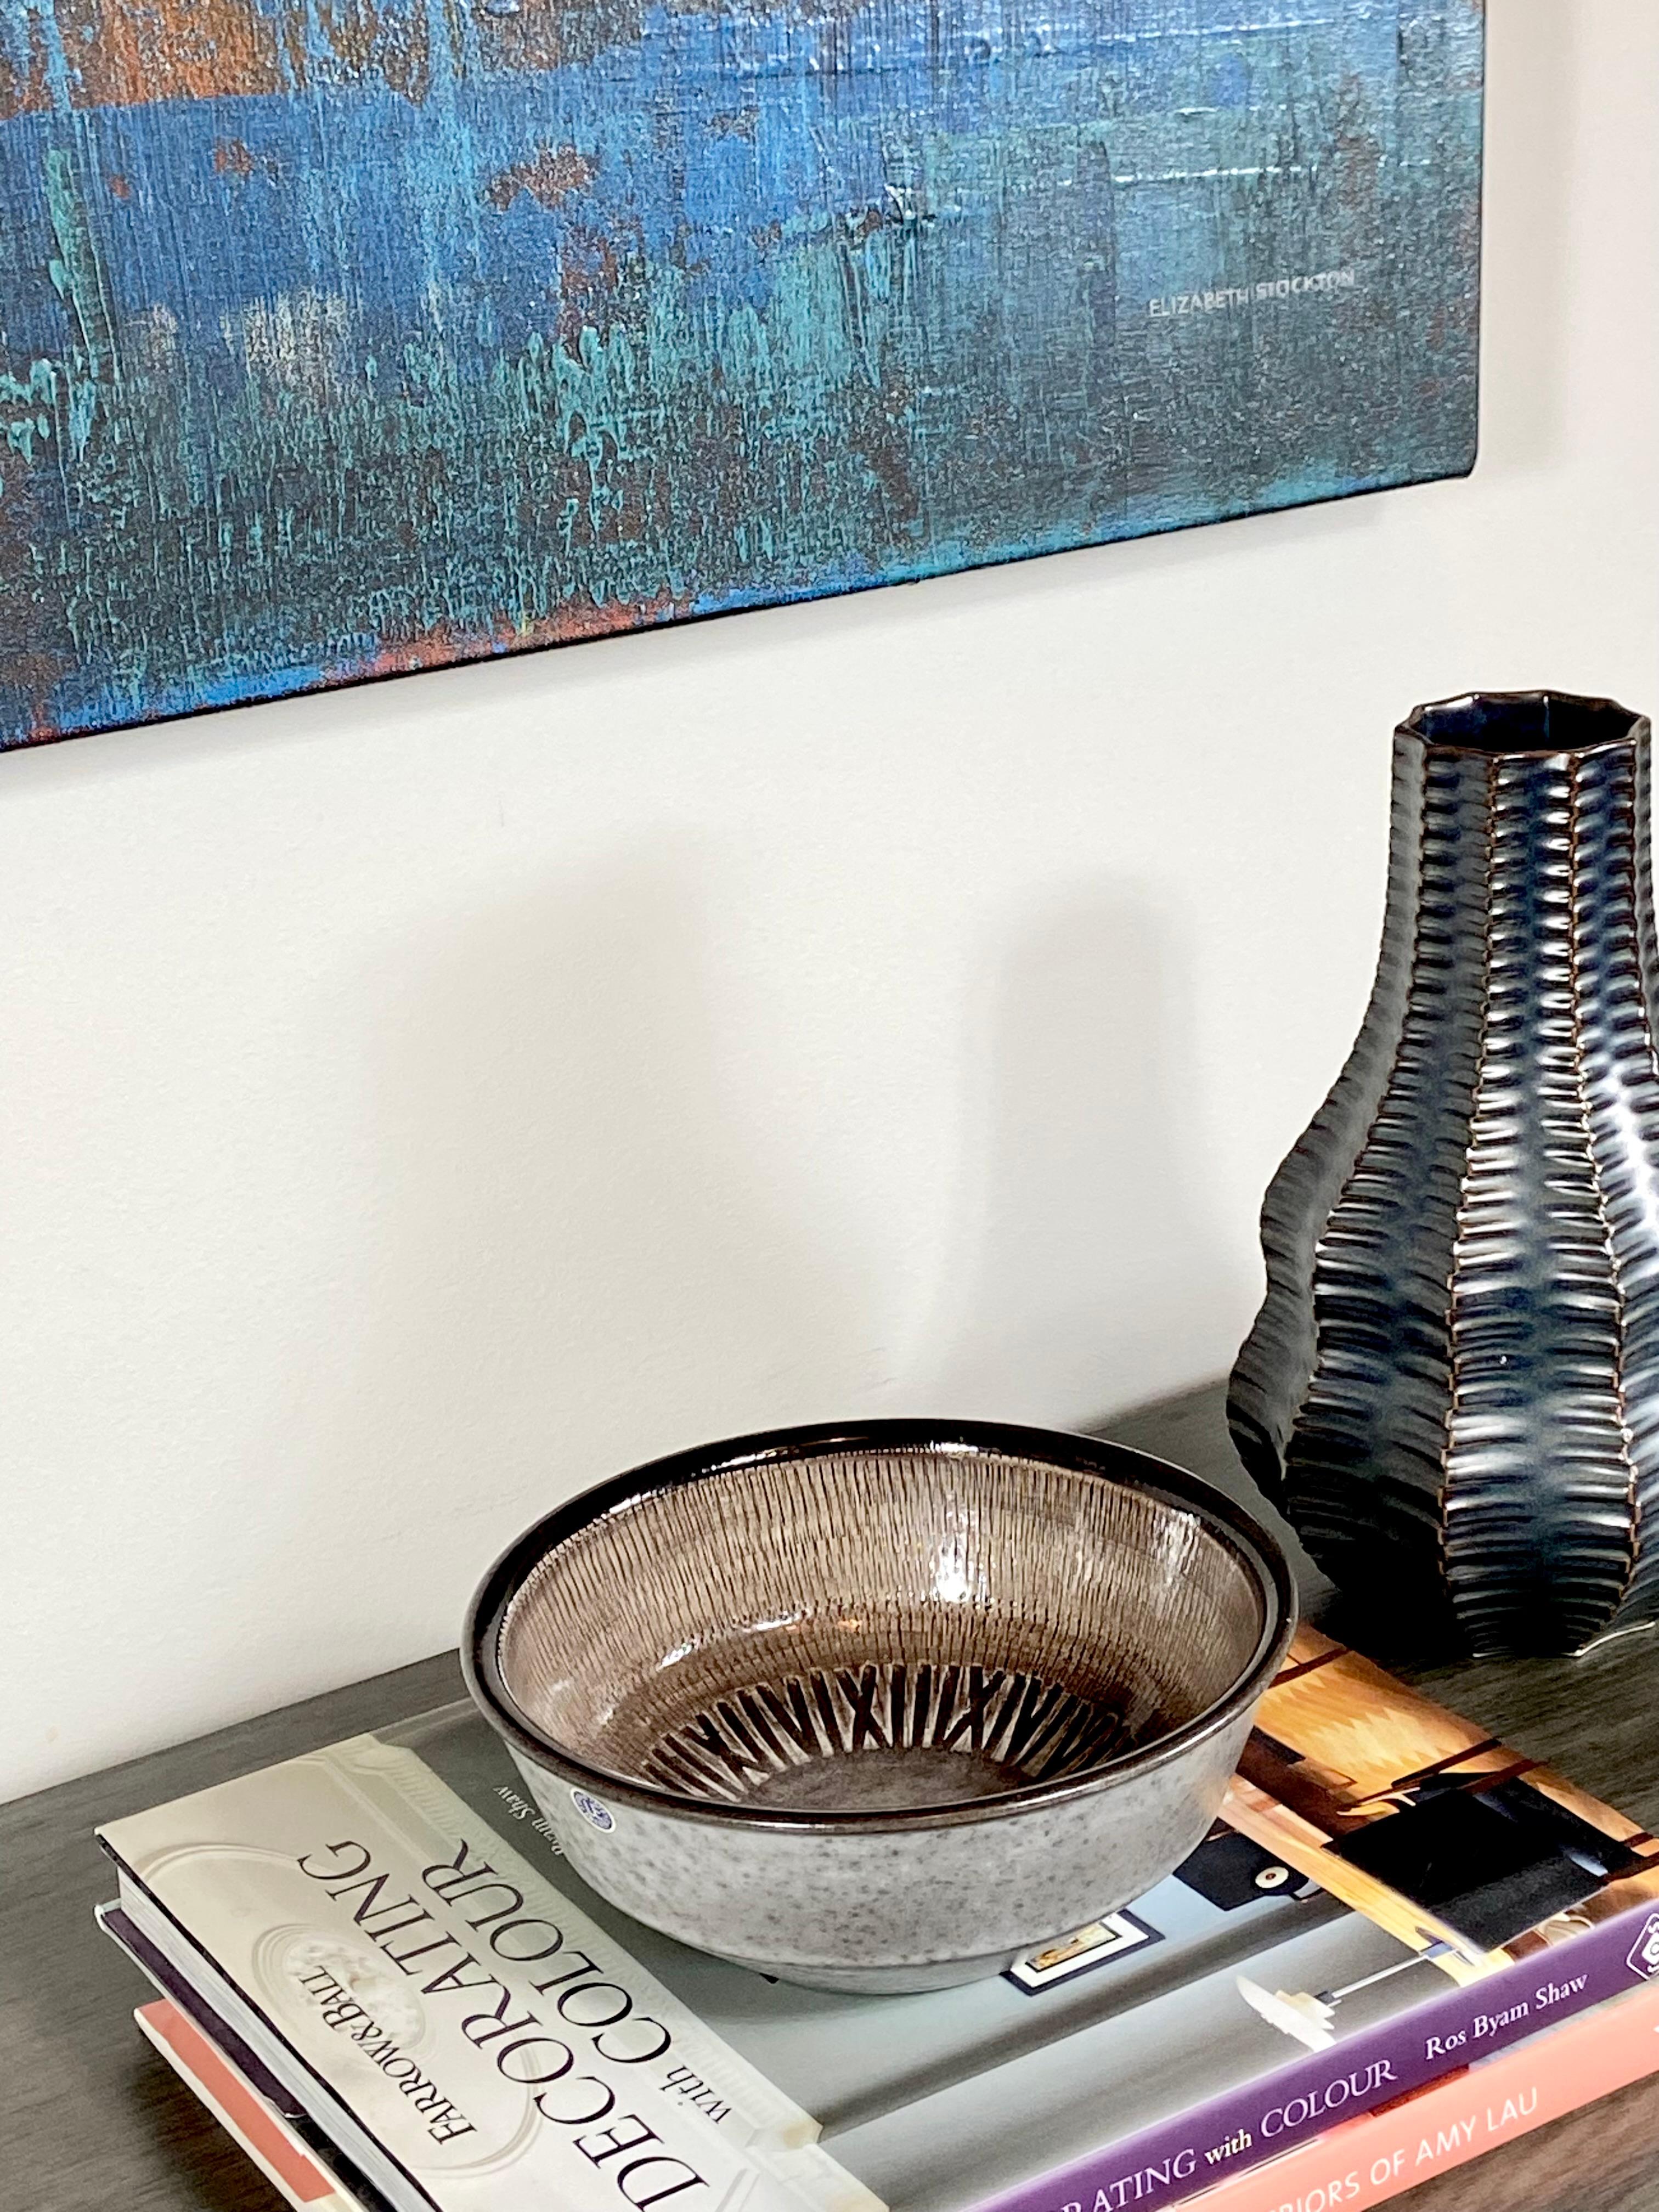 This beautifully incised Mid Century bowl is by Ingrid Atterberg for Upsala Ekeby Sweden. It was hand glazed and hand carved in the 1960's. It's glazed in a latte, mottled grey and brown finish with a brown trim. The interior design has quite a bit